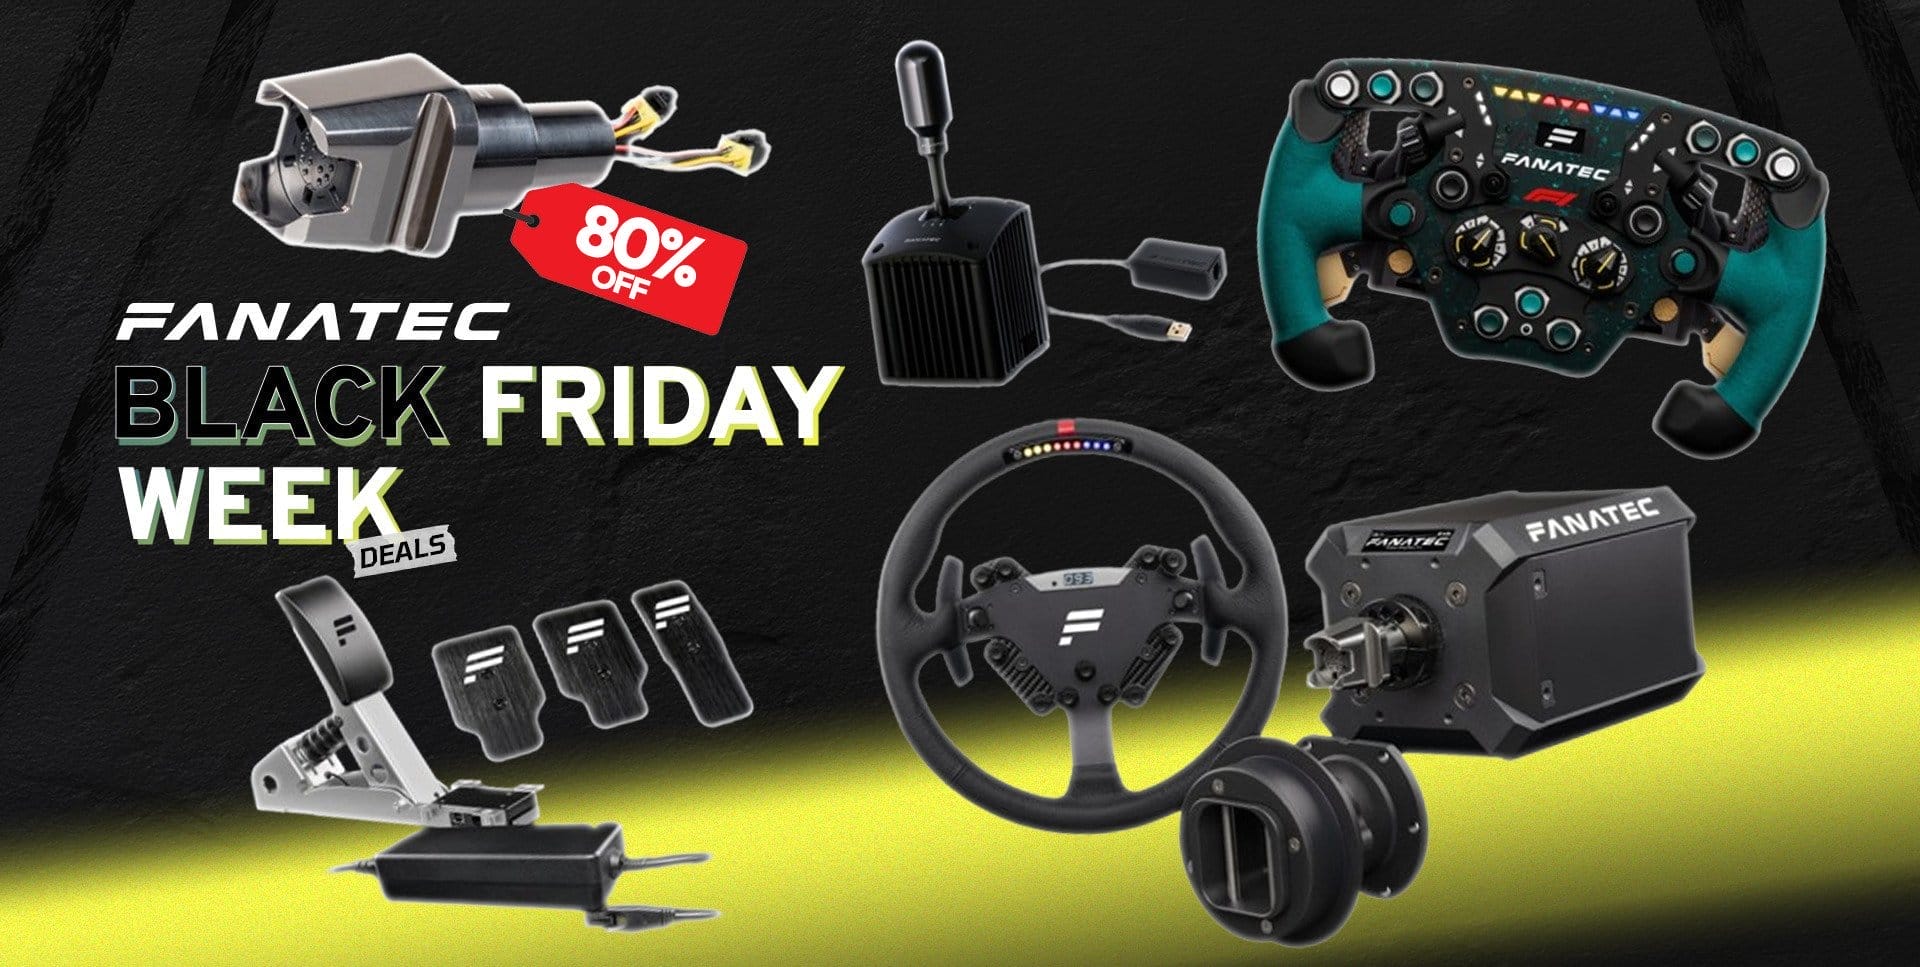 Fanatec Discounts Sim Racing Hardware up to 80% for Black Friday